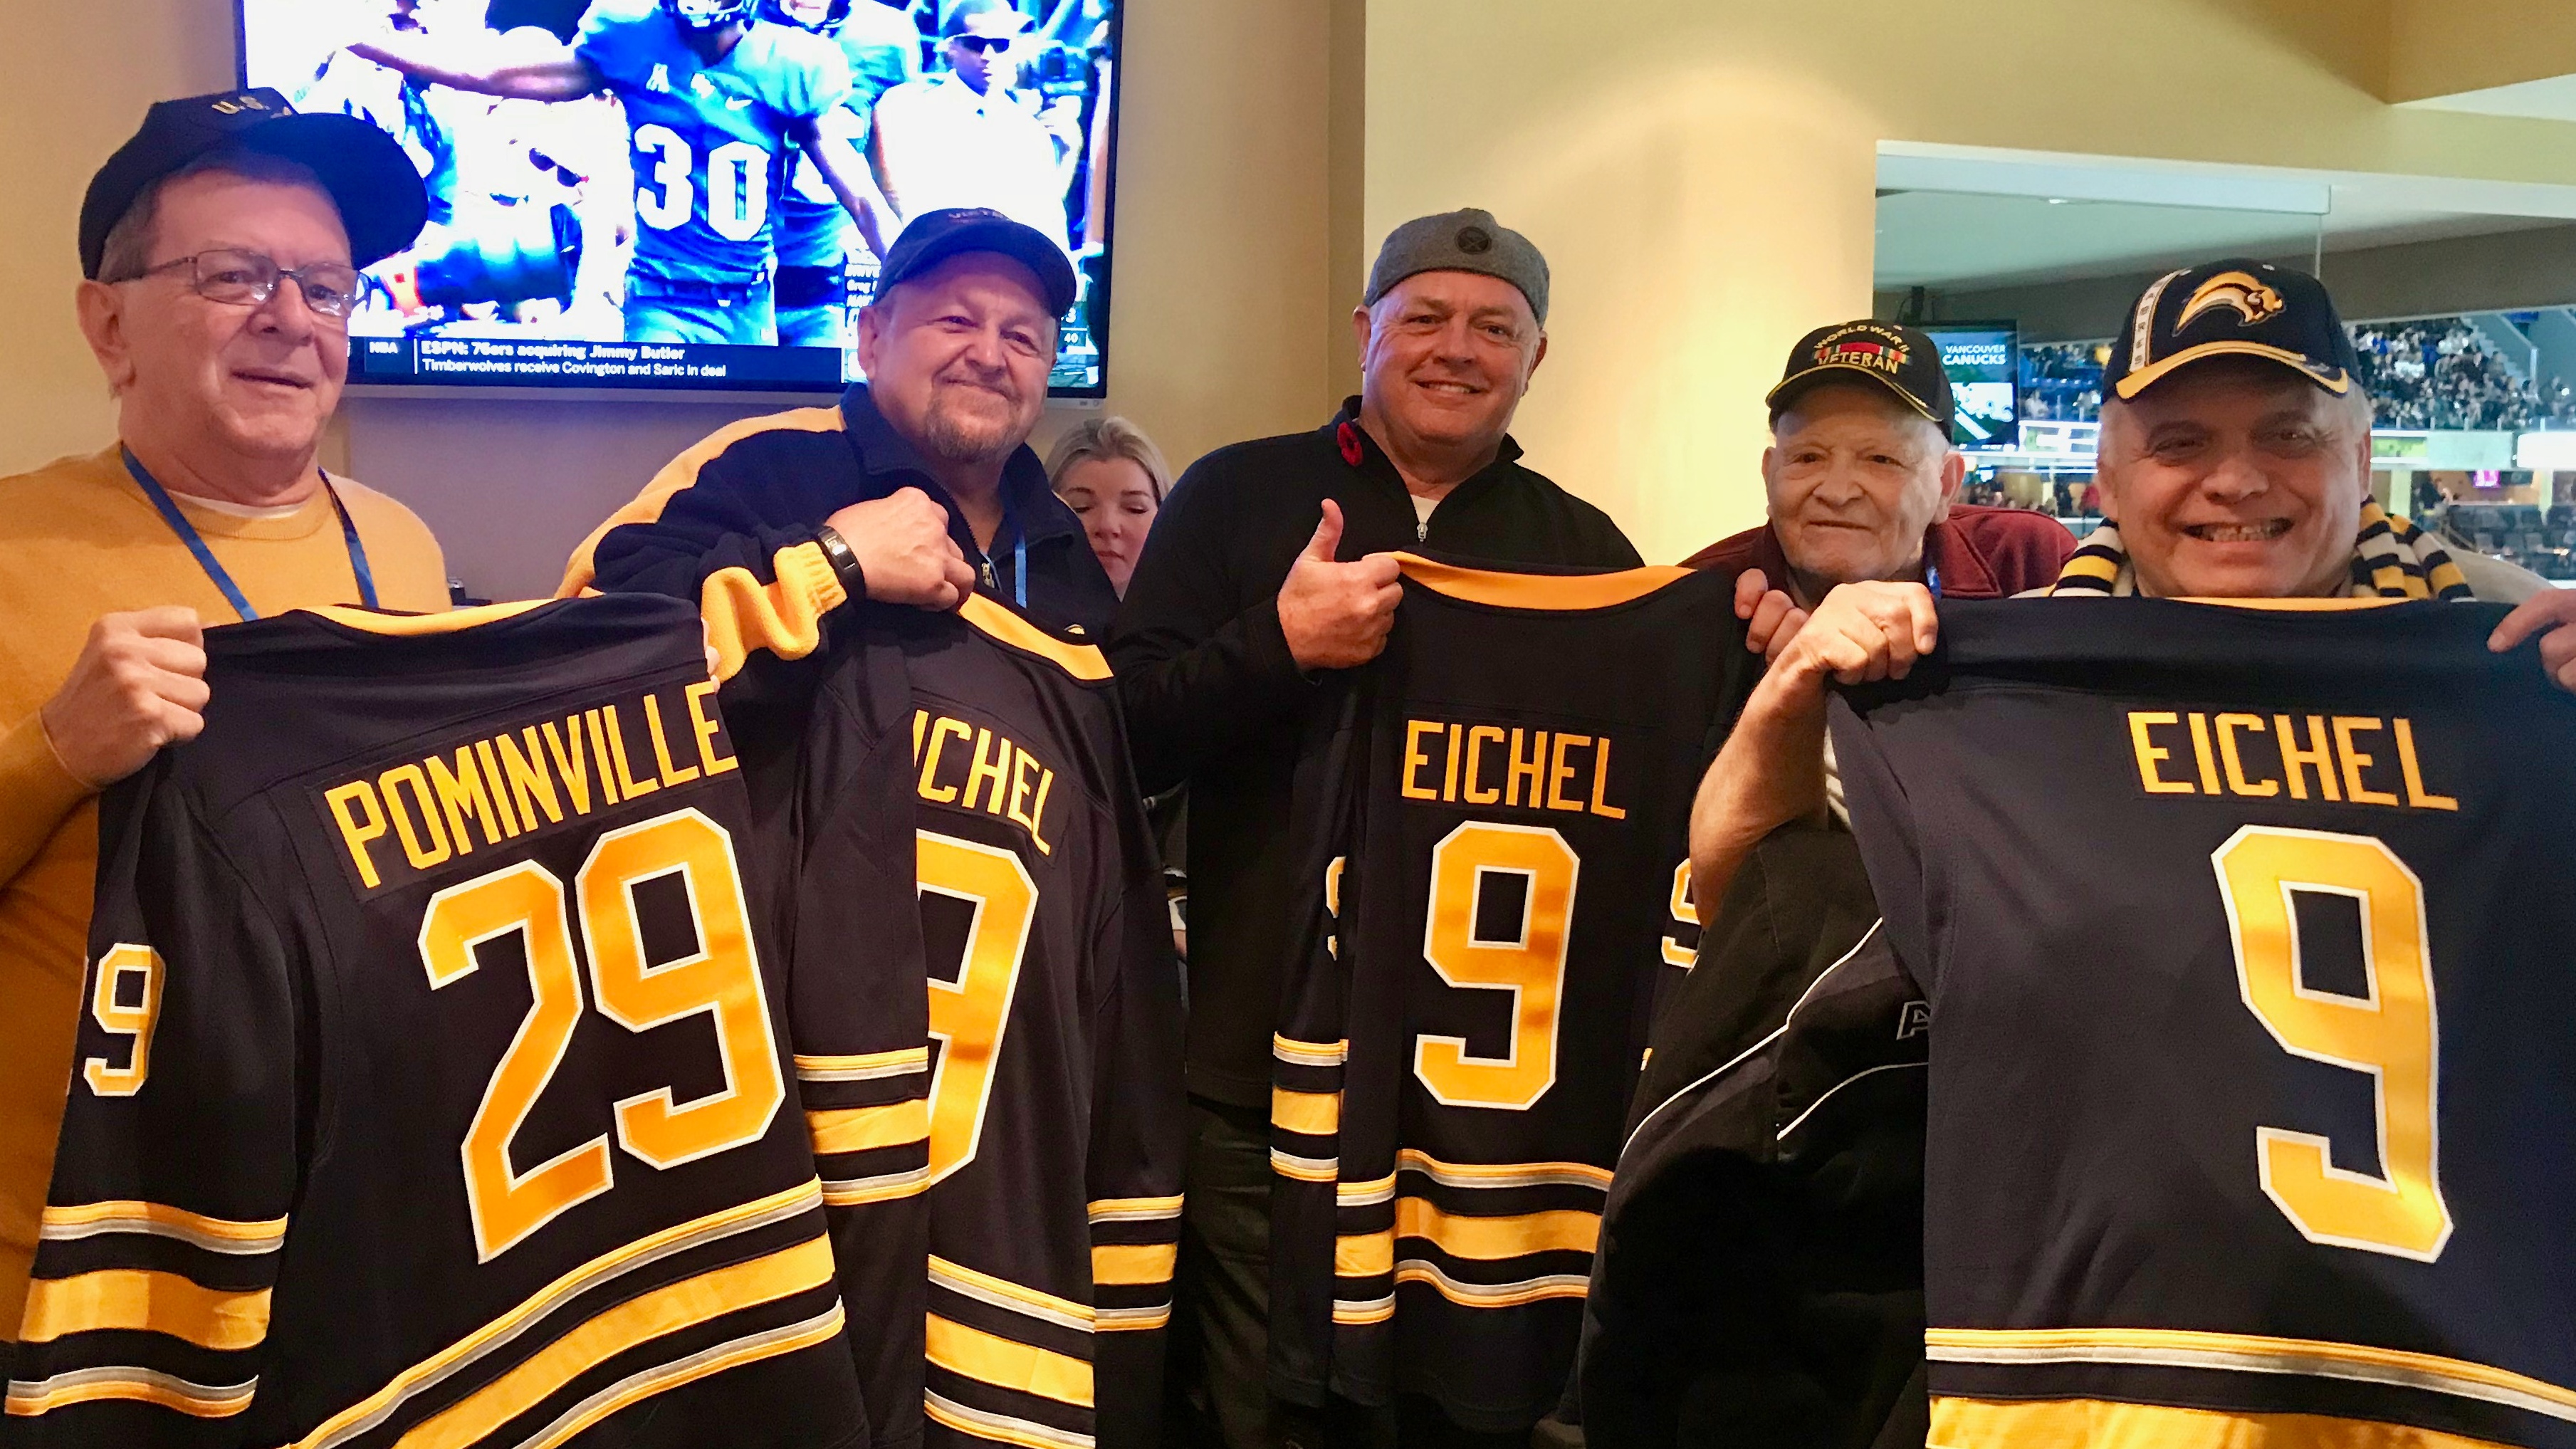 A Week of Veteran's Wishes includes a Sabres Game! Image